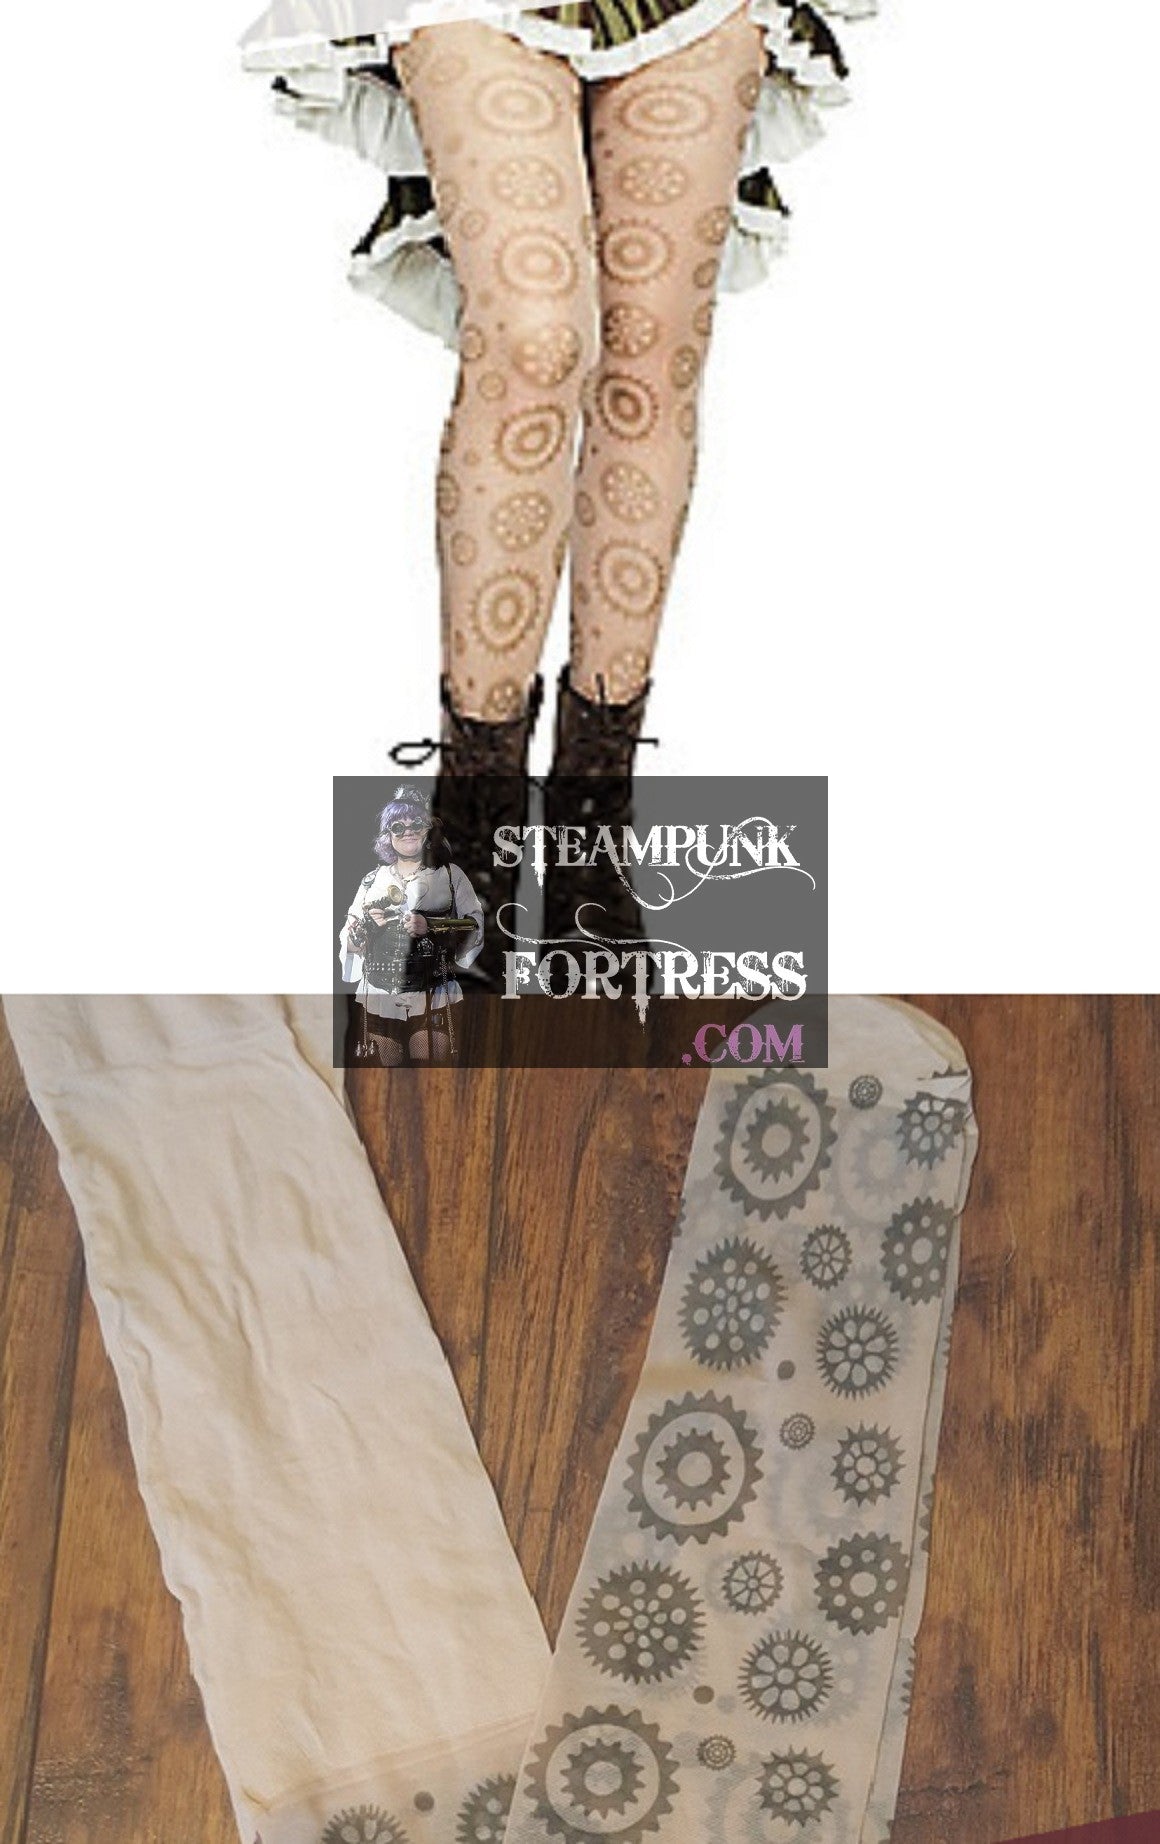 SHEER PANTYHOSE GEARS STEAMPUNK TIGHTS NYLONS HOSIERY STOCKINGS ONE SIZE FITS MOST - NEW - MASS PRODUCED DUPLICATE